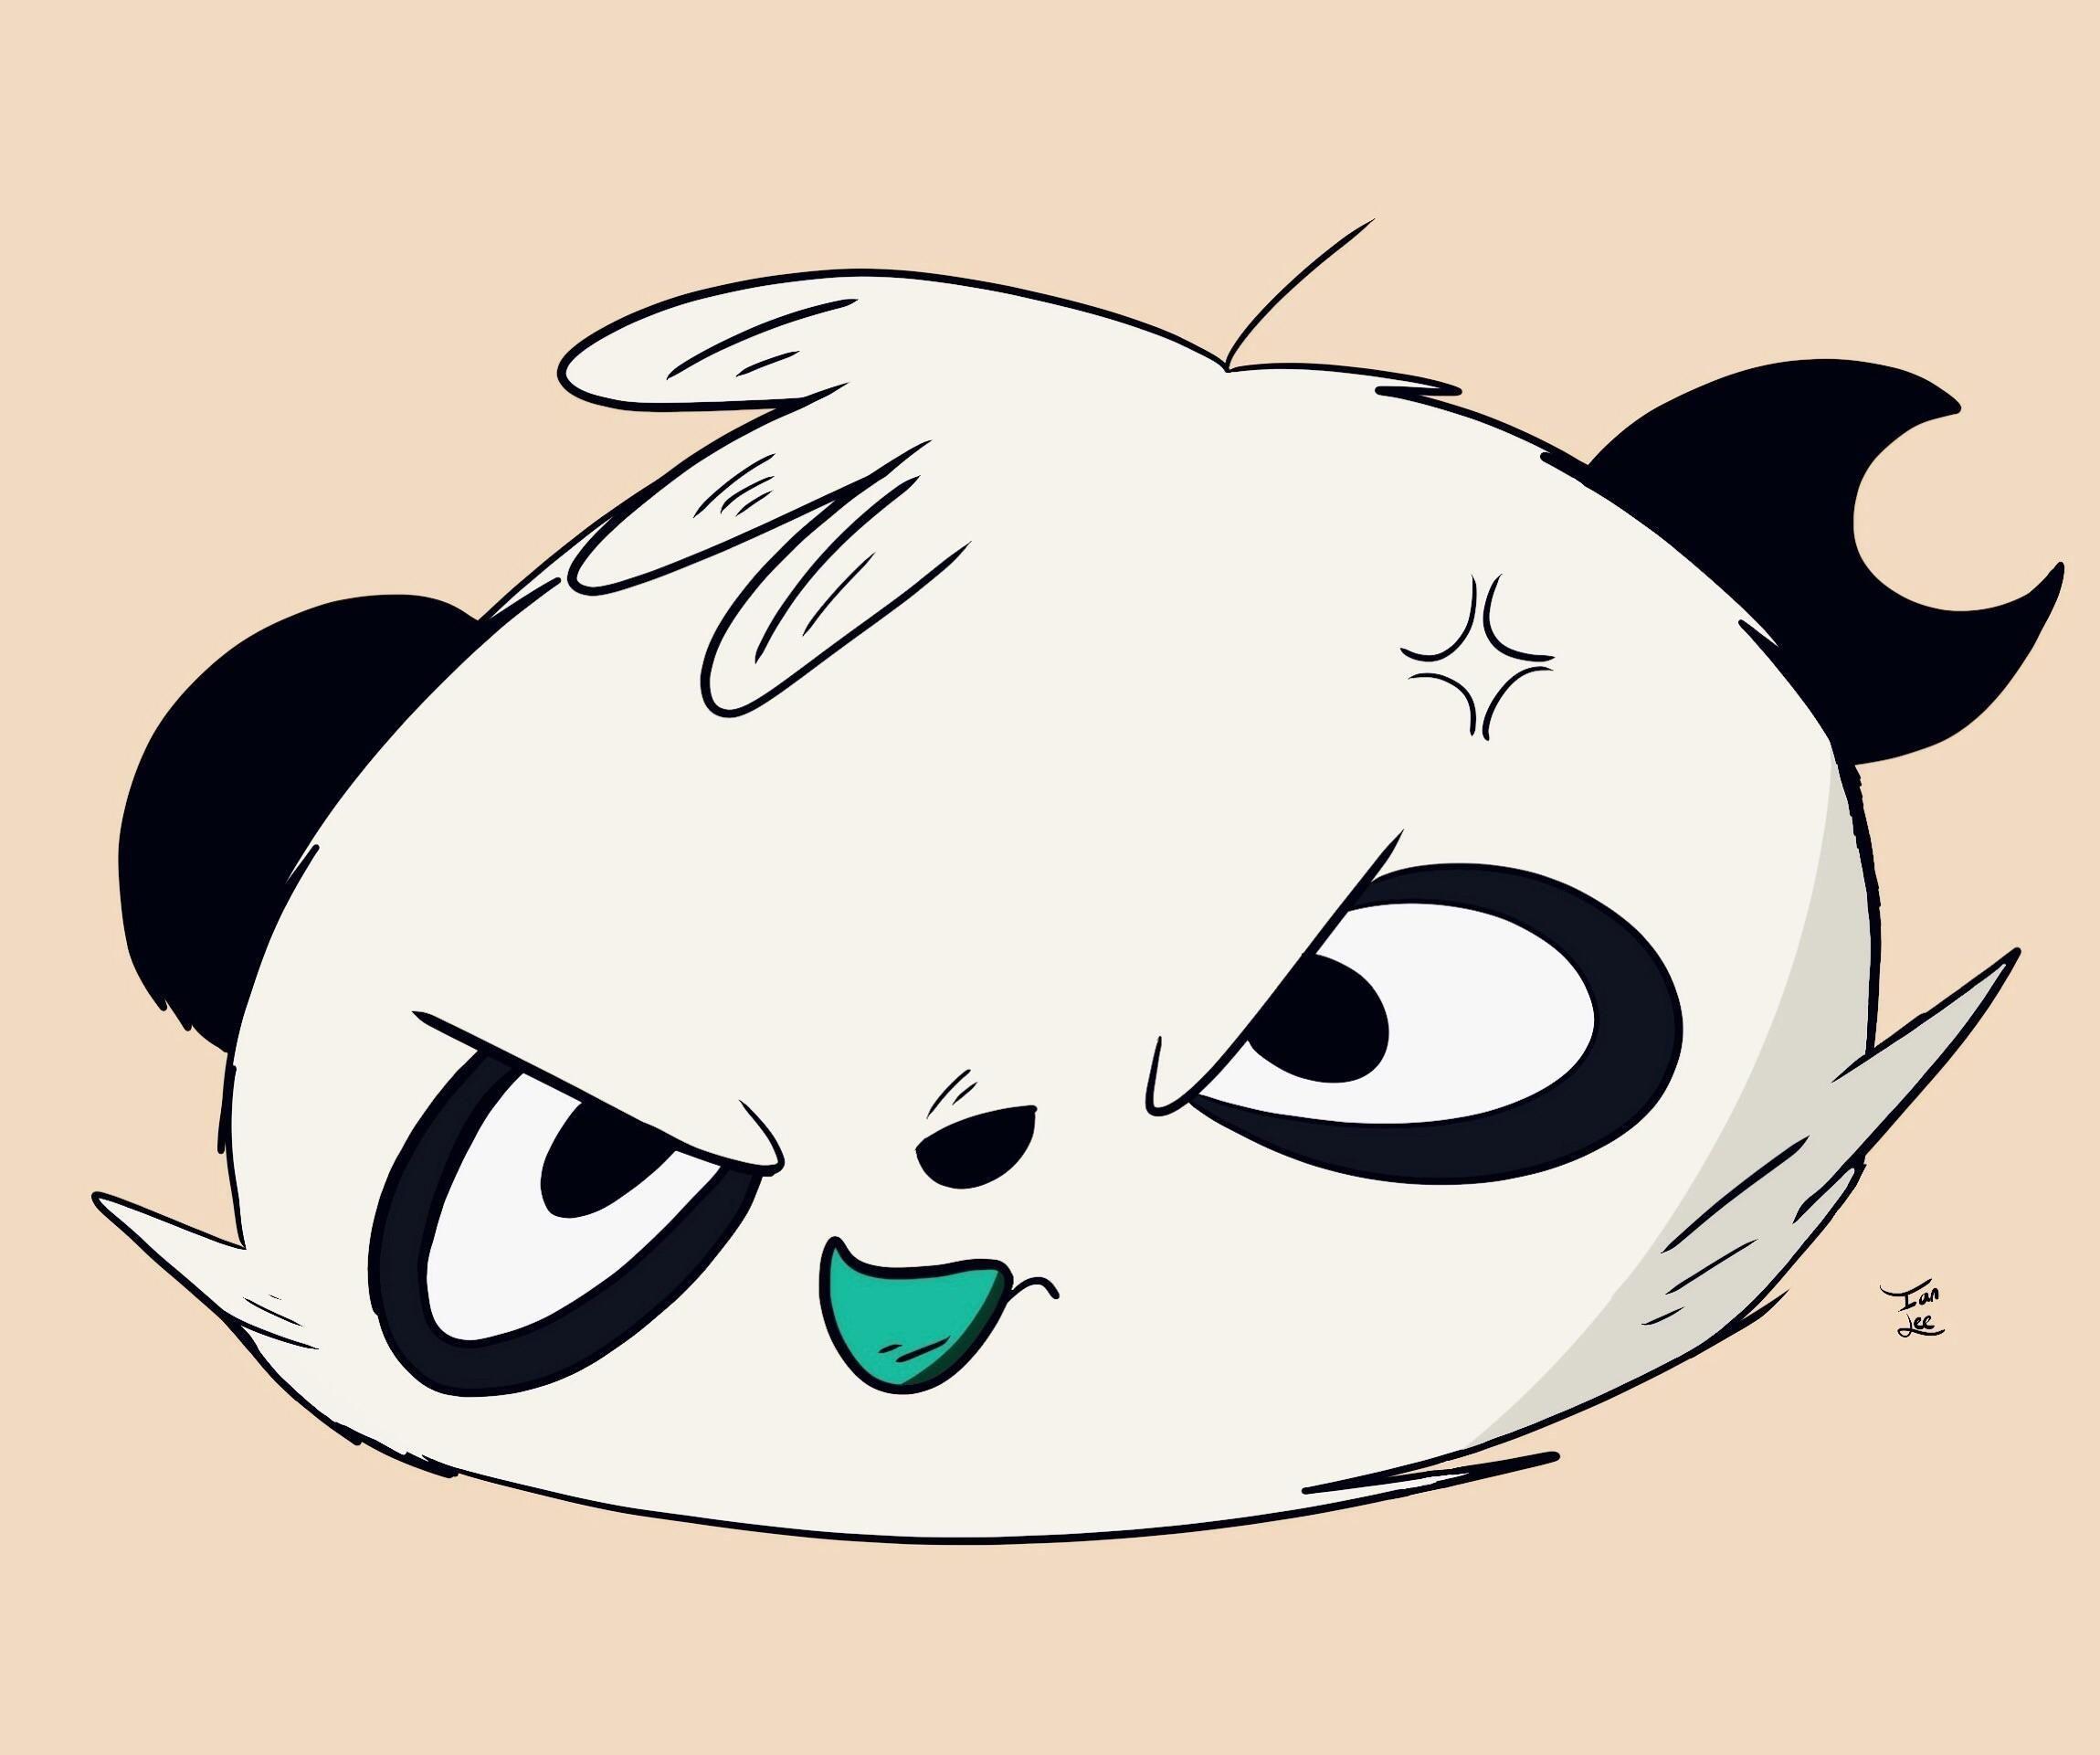 Grumpy pancham (i.redd.it) submitted by Morningsun92 to /r